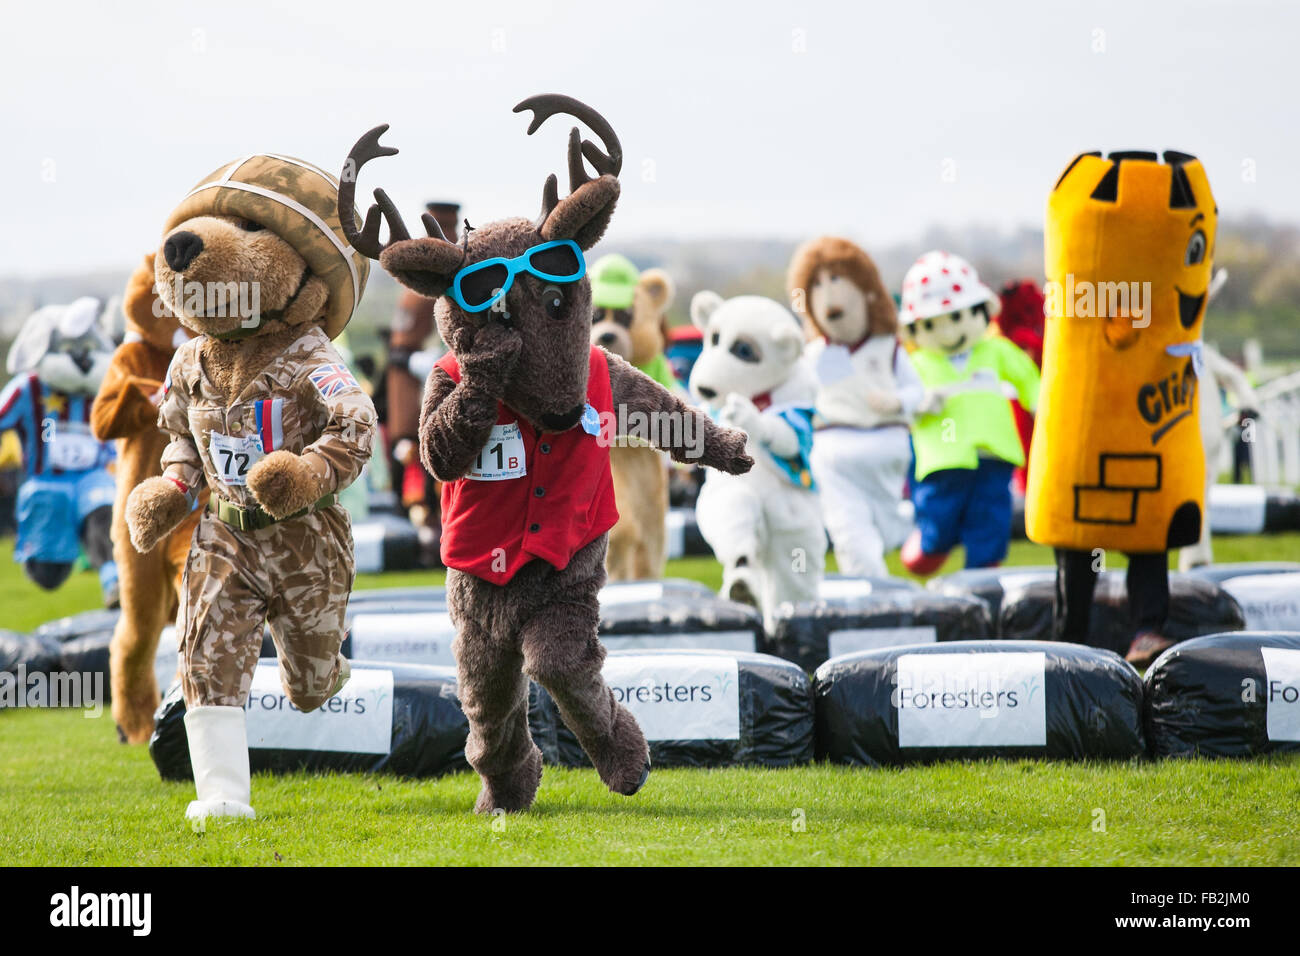 La mascotte 2014 Gold Cup a Wetherby Race Course, Wetherby, West Yorkshire, Regno Unito. Foto Stock